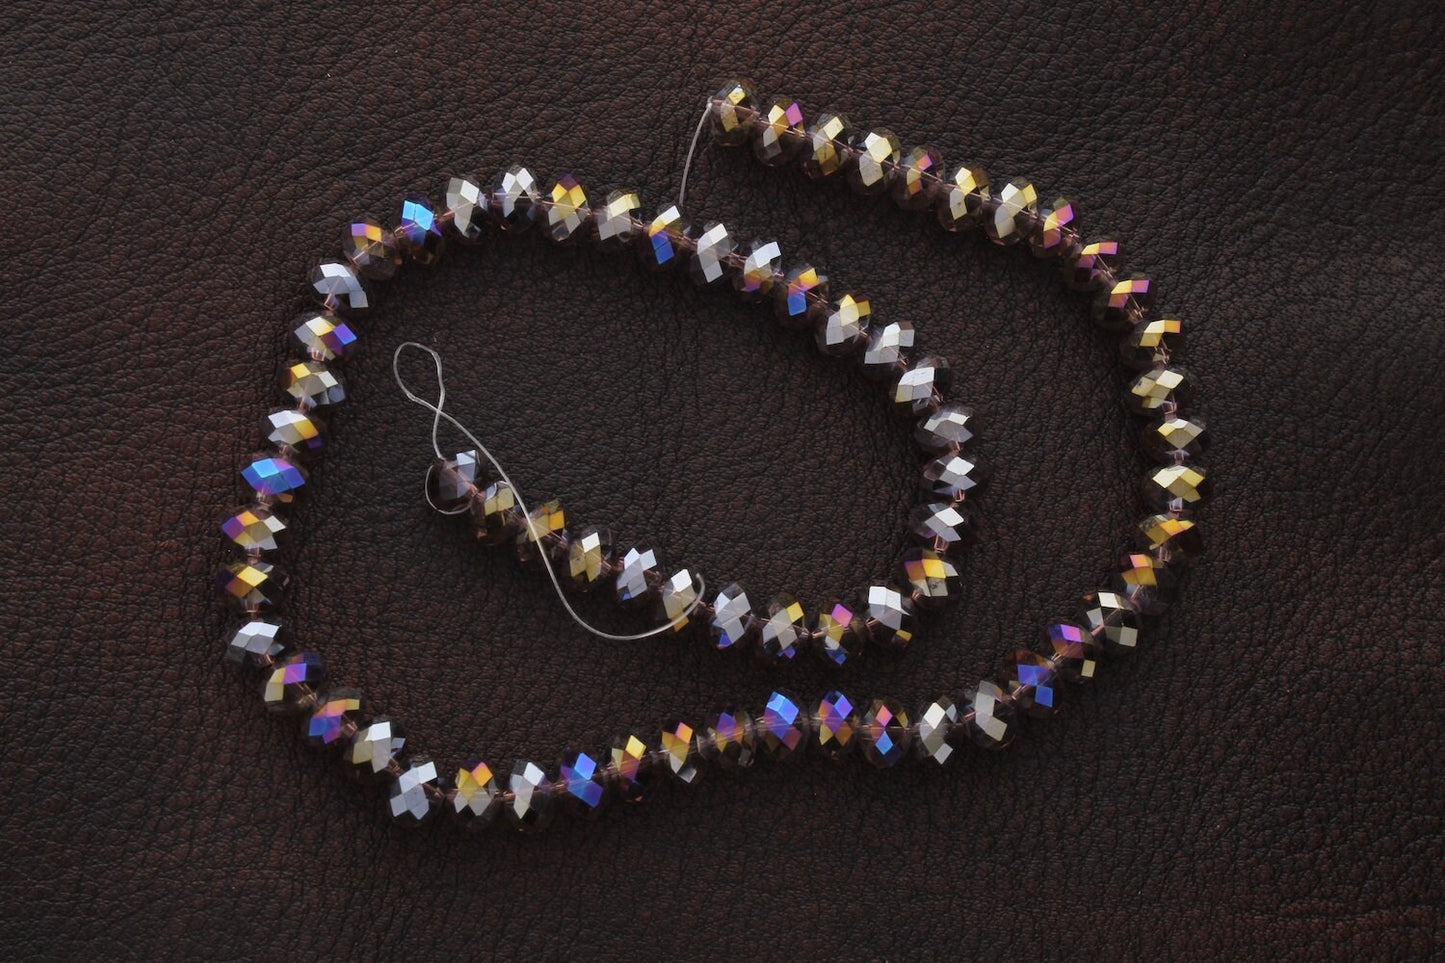 Amethyst Faceted Fire-n-Ice Crystal Beads, 16" Strand, 6x8mm